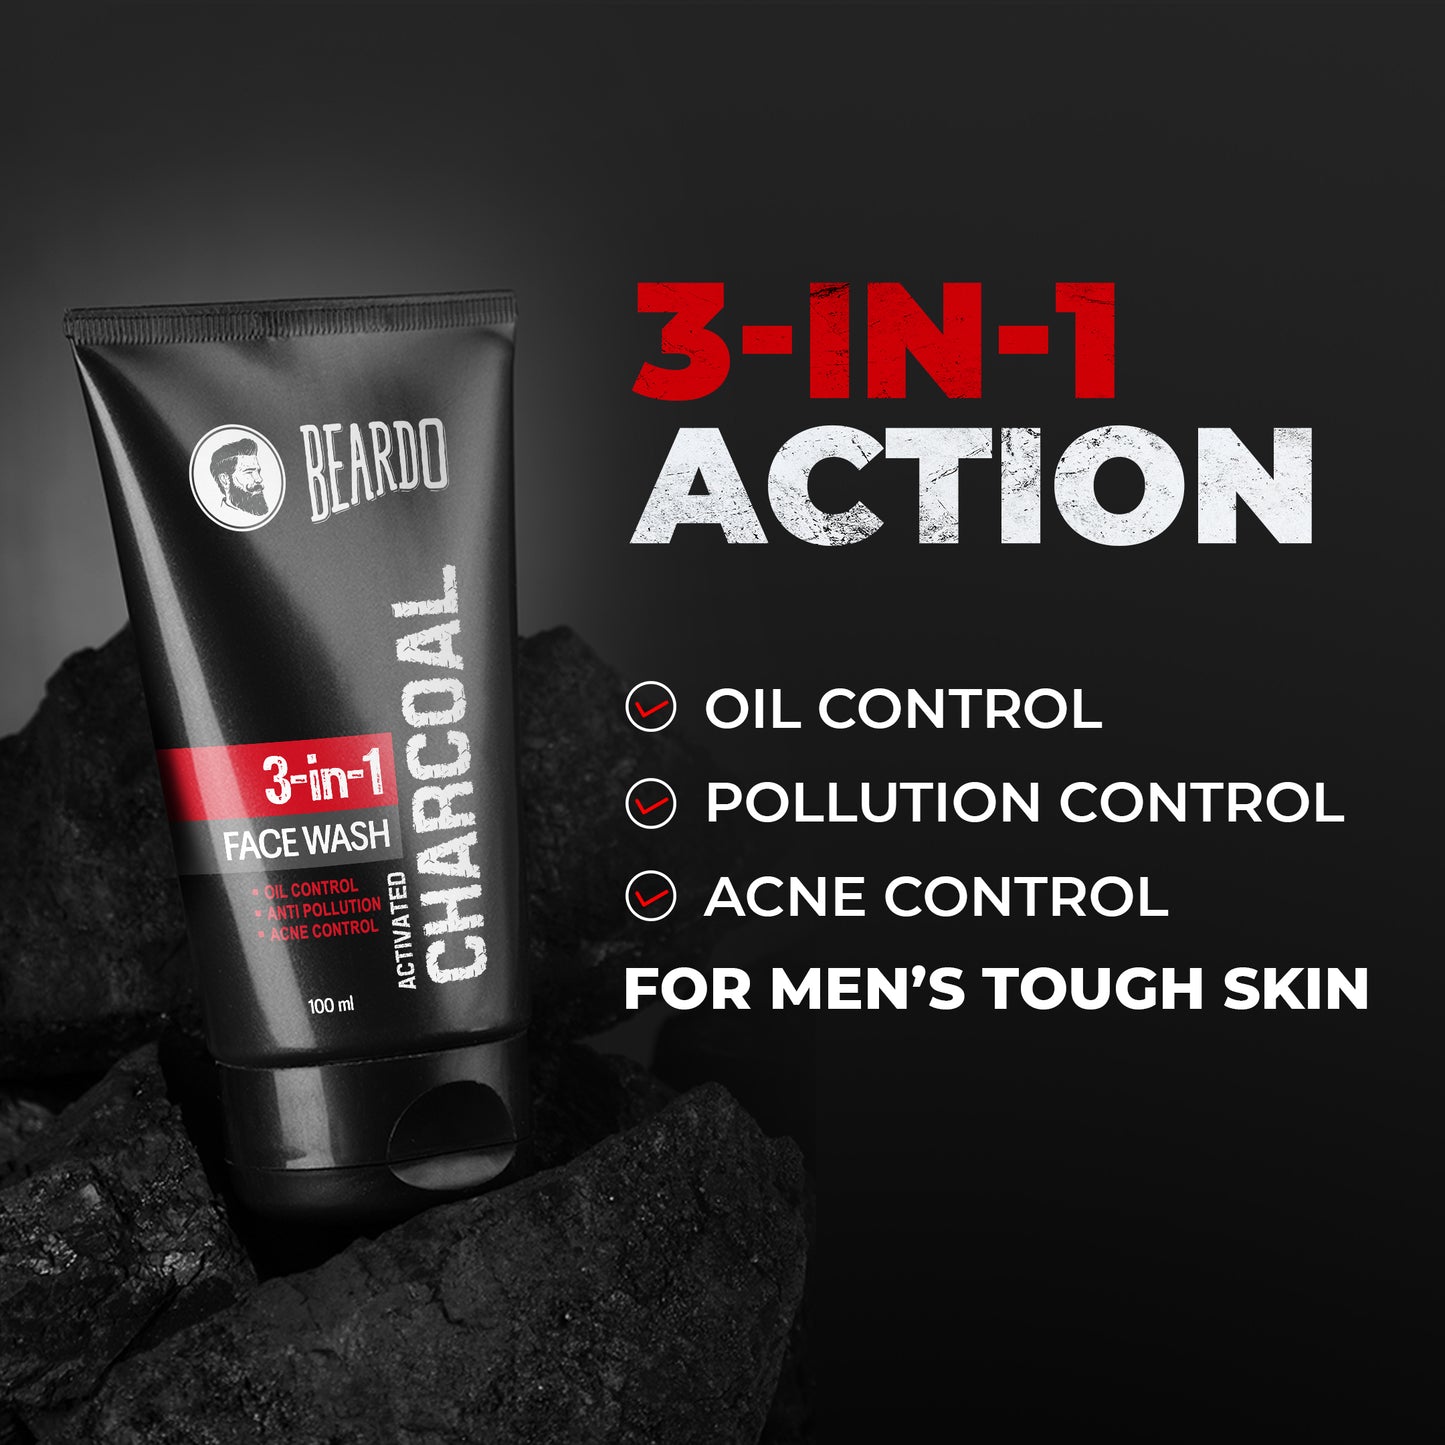 oil control, acne control, deep cleansing, tough men skin, Can I use Beardo charcoal face wash daily, Which is the No 1 face wash?, Which company face wash is best?, Which is the best face wash for men?, Does charcoal face wash brighten skin?